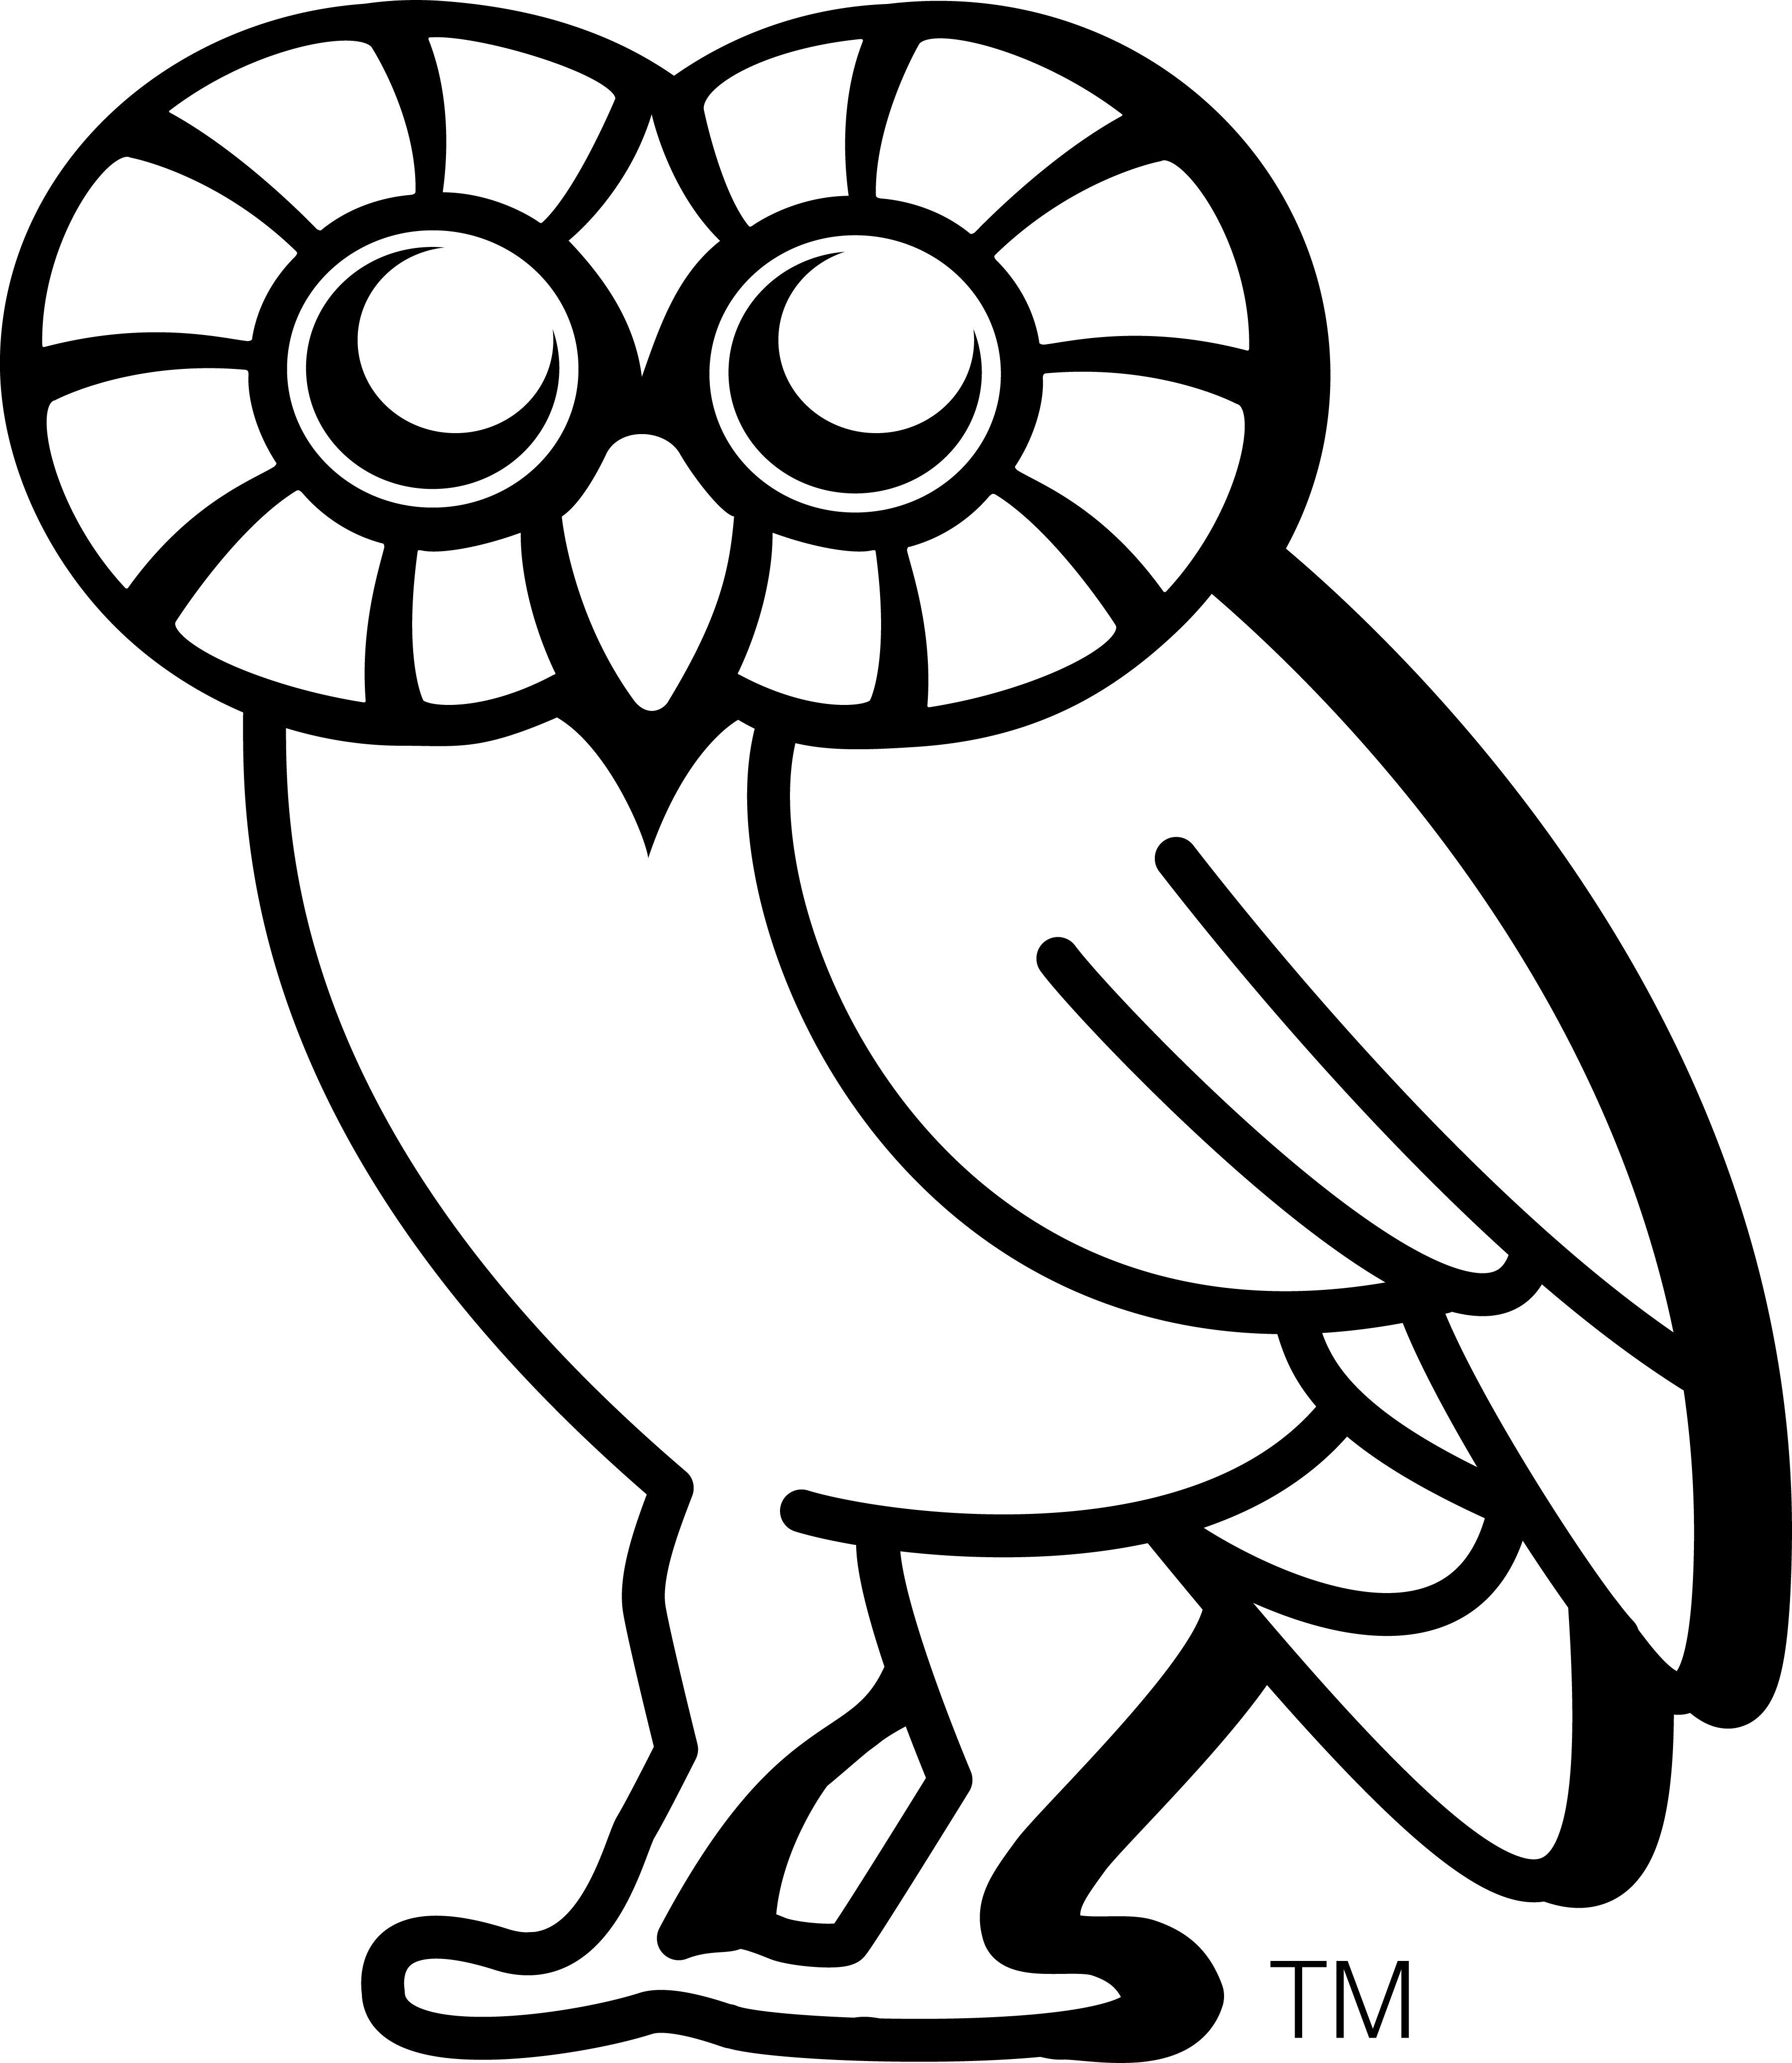 Black and White Owl Logo - Downloads and Tools : Rice University